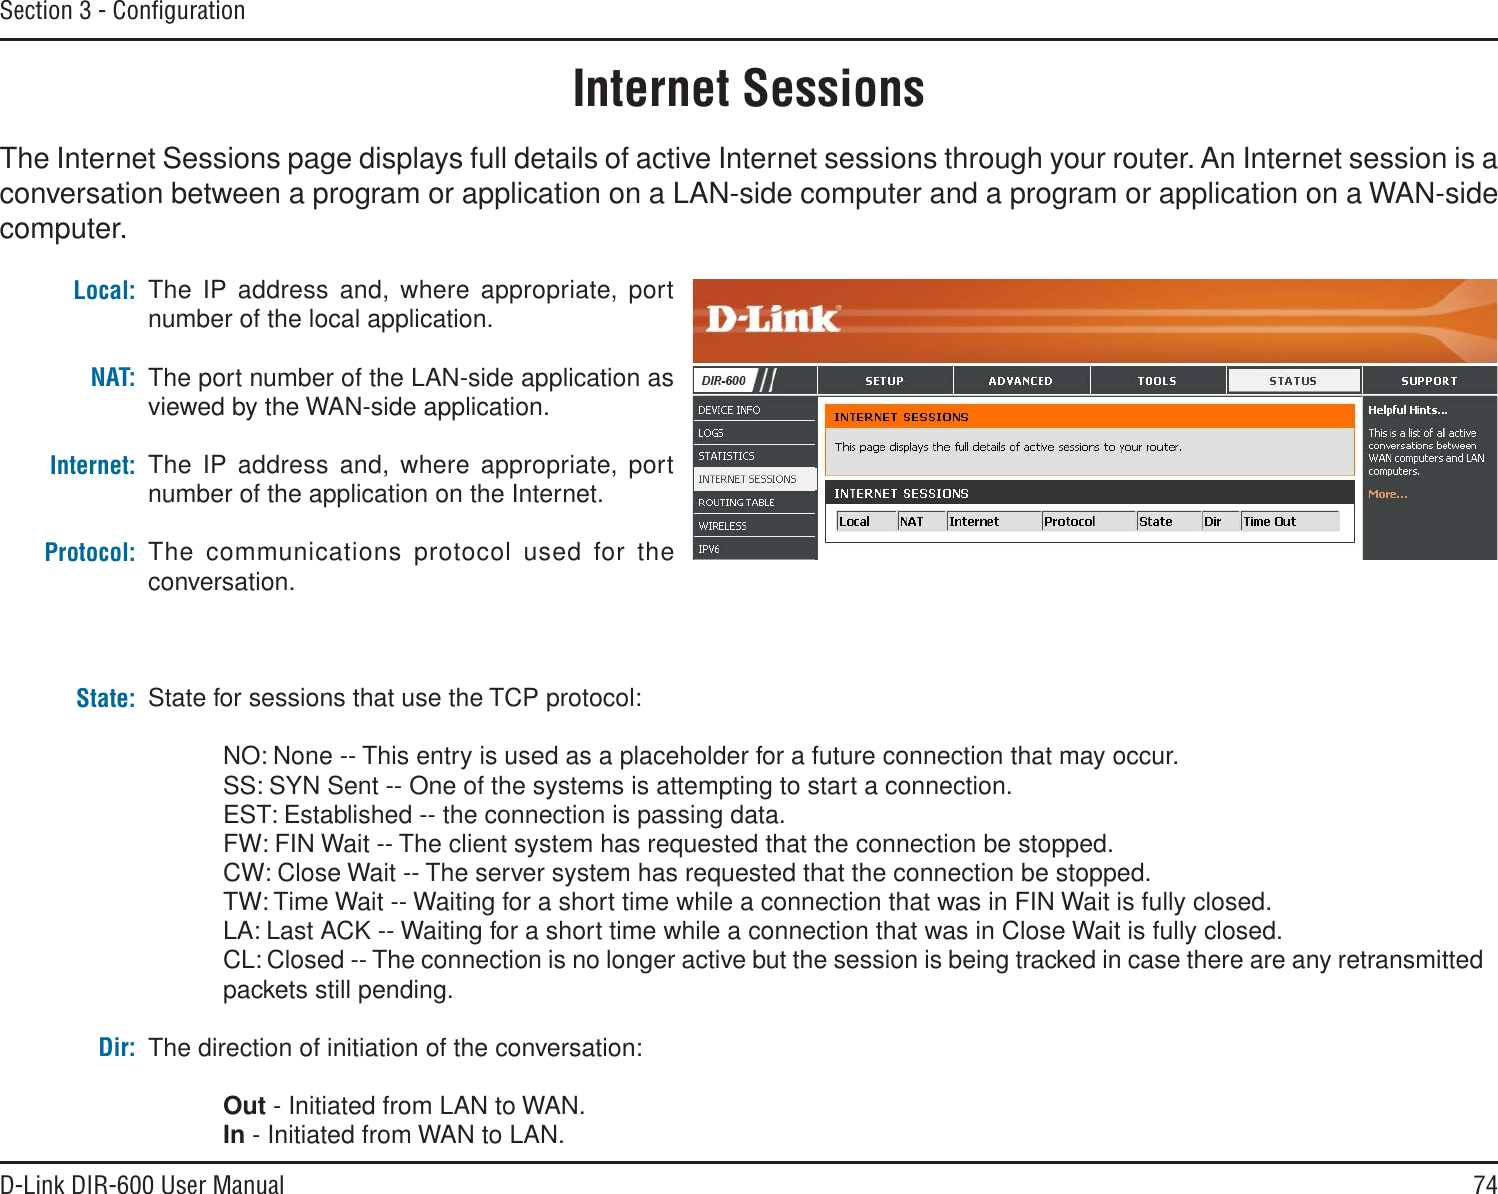 74D-Link DIR-600 User ManualSection 3 - ConﬁgurationInternet SessionsThe Internet Sessions page displays full details of active Internet sessions through your router. An Internet session is a conversation between a program or application on a LAN-side computer and a program or application on a WAN-side computer. Local:NAT:Internet:Protocol:State:Dir:The IP address and, where appropriate, port number of the local application. The port number of the LAN-side application as viewed by the WAN-side application. The IP address and, where appropriate, port number of the application on the Internet. The communications protocol used for the conversation. State for sessions that use the TCP protocol:NO: None -- This entry is used as a placeholder for a future connection that may occur.SS: SYN Sent -- One of the systems is attempting to start a connection.EST: Established -- the connection is passing data.FW: FIN Wait -- The client system has requested that the connection be stopped.CW: Close Wait -- The server system has requested that the connection be stopped.TW: Time Wait -- Waiting for a short time while a connection that was in FIN Wait is fully closed.LA: Last ACK -- Waiting for a short time while a connection that was in Close Wait is fully closed.CL: Closed -- The connection is no longer active but the session is being tracked in case there are any retransmitted packets still pending.The direction of initiation of the conversation: Out - Initiated from LAN to WAN.In - Initiated from WAN to LAN.